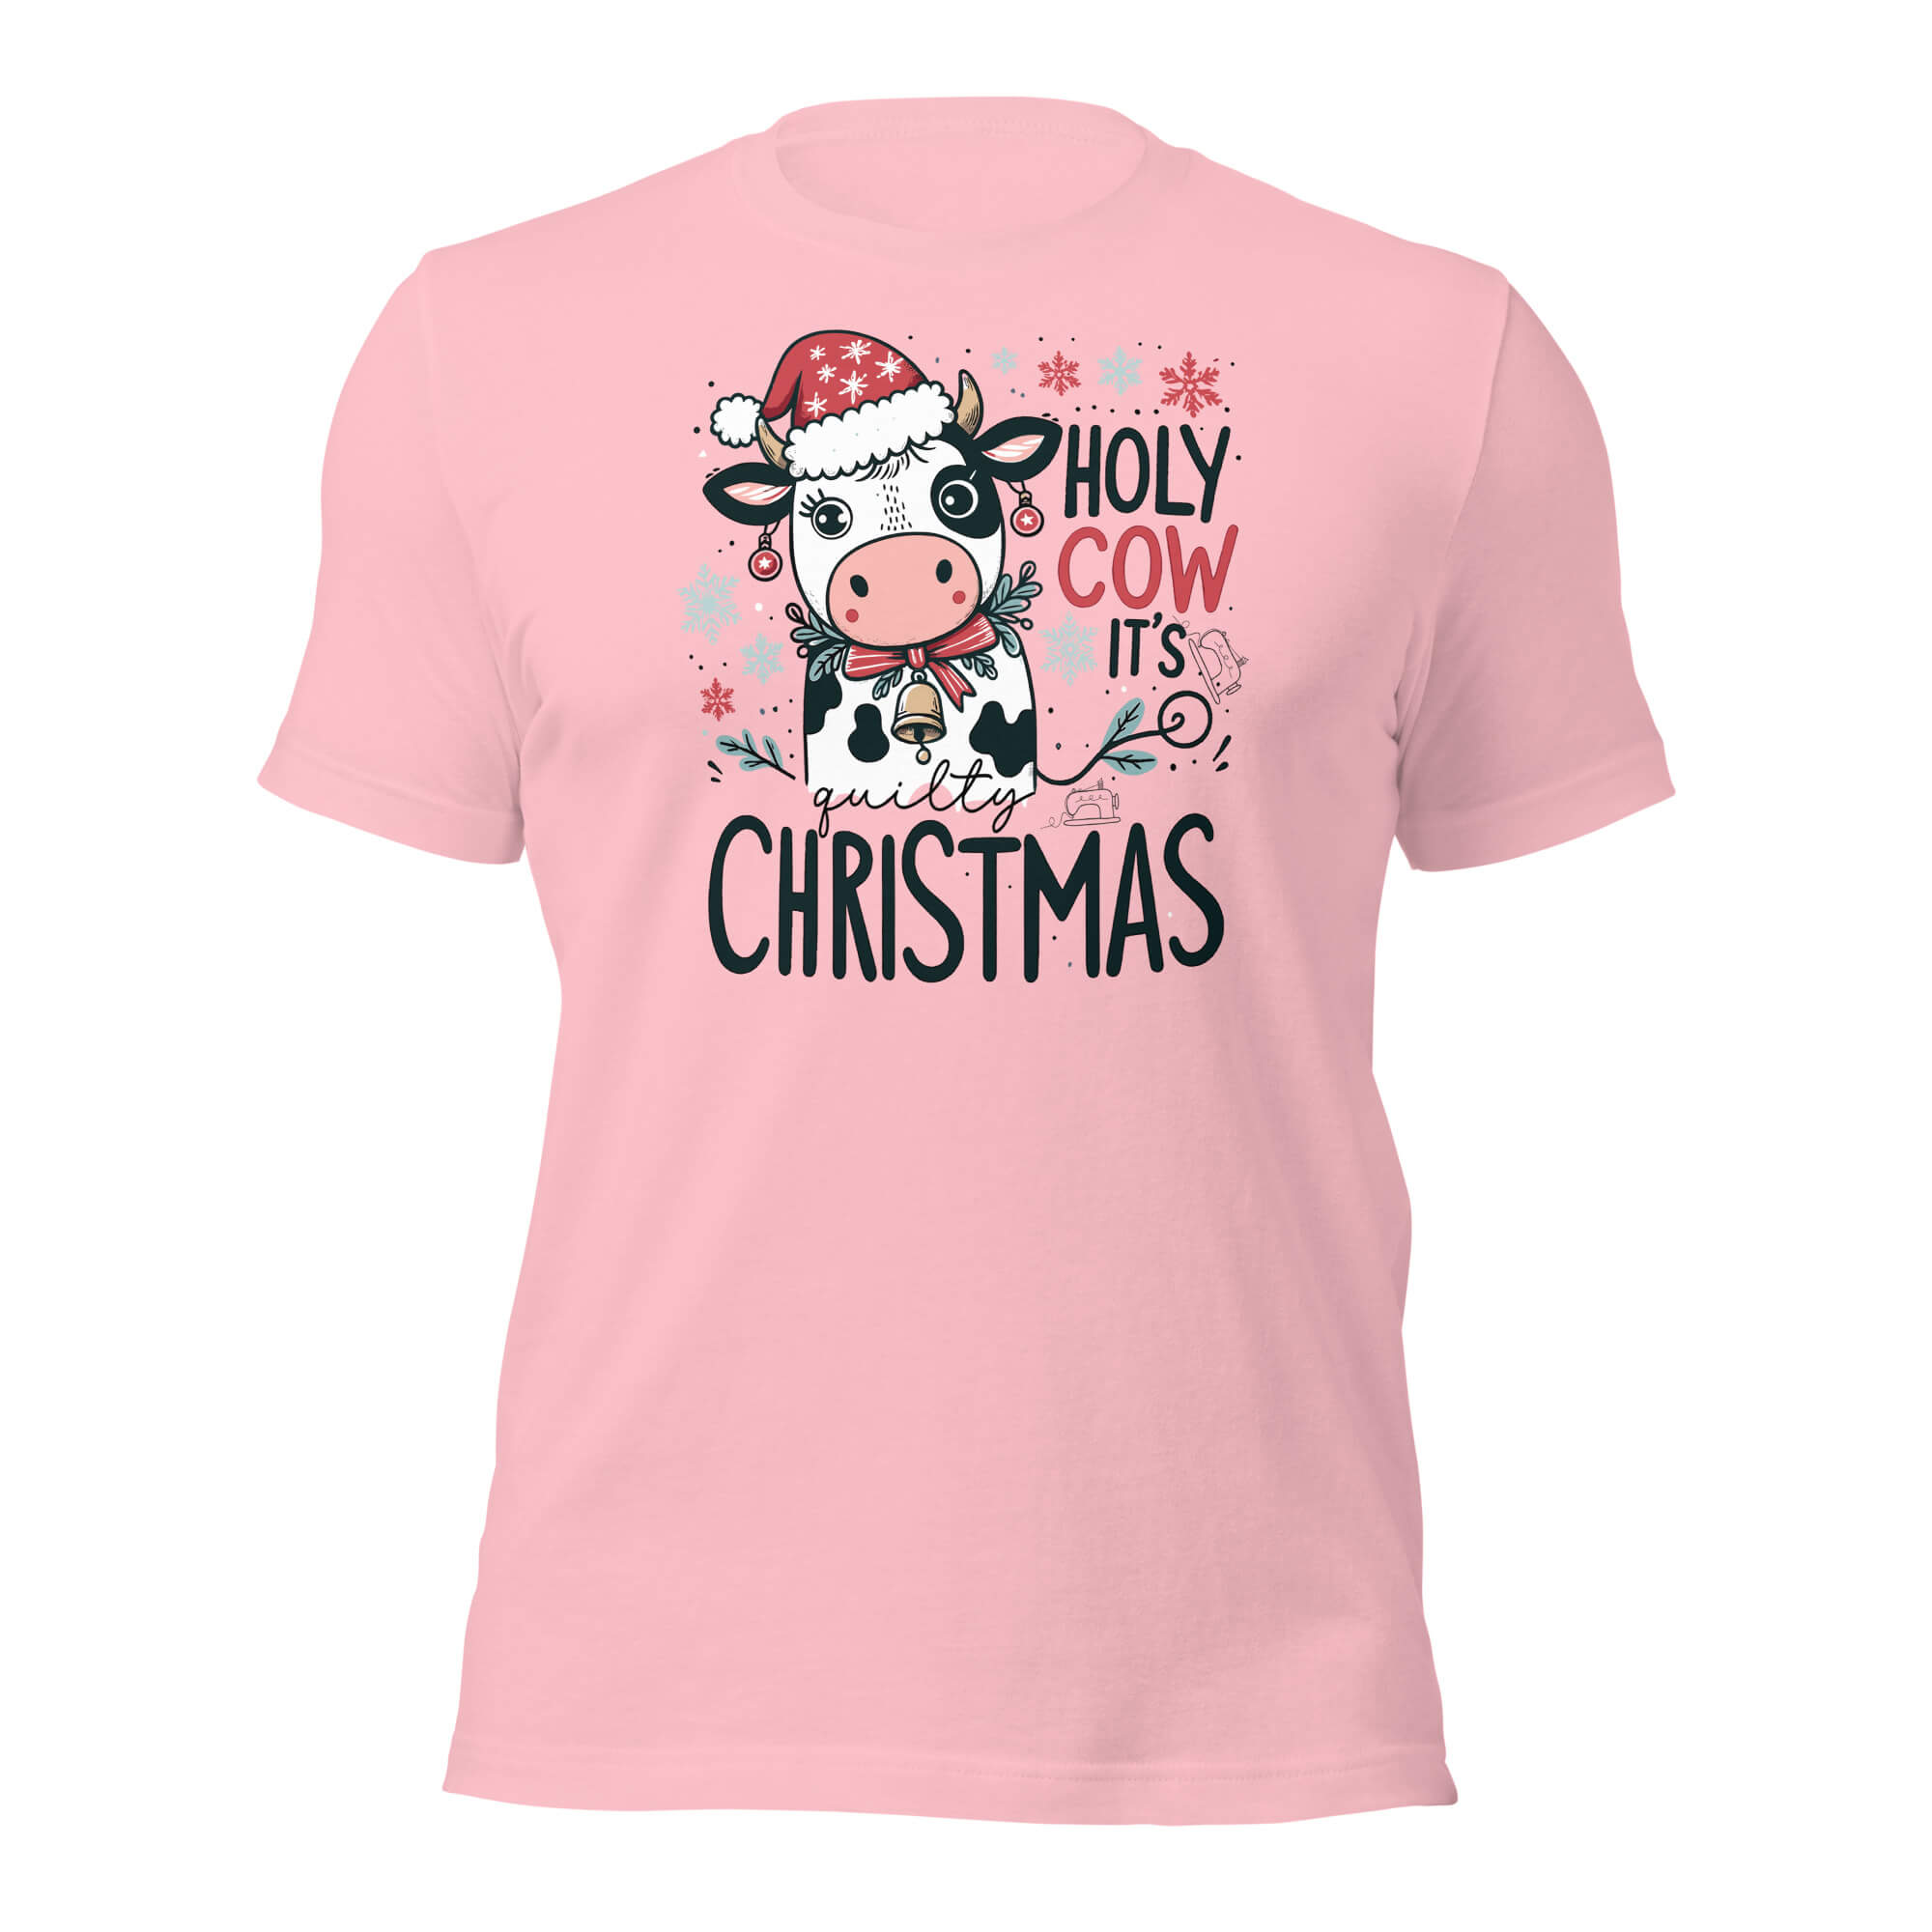 holy-cow-its-quilty-christmas-t-shirt-pink